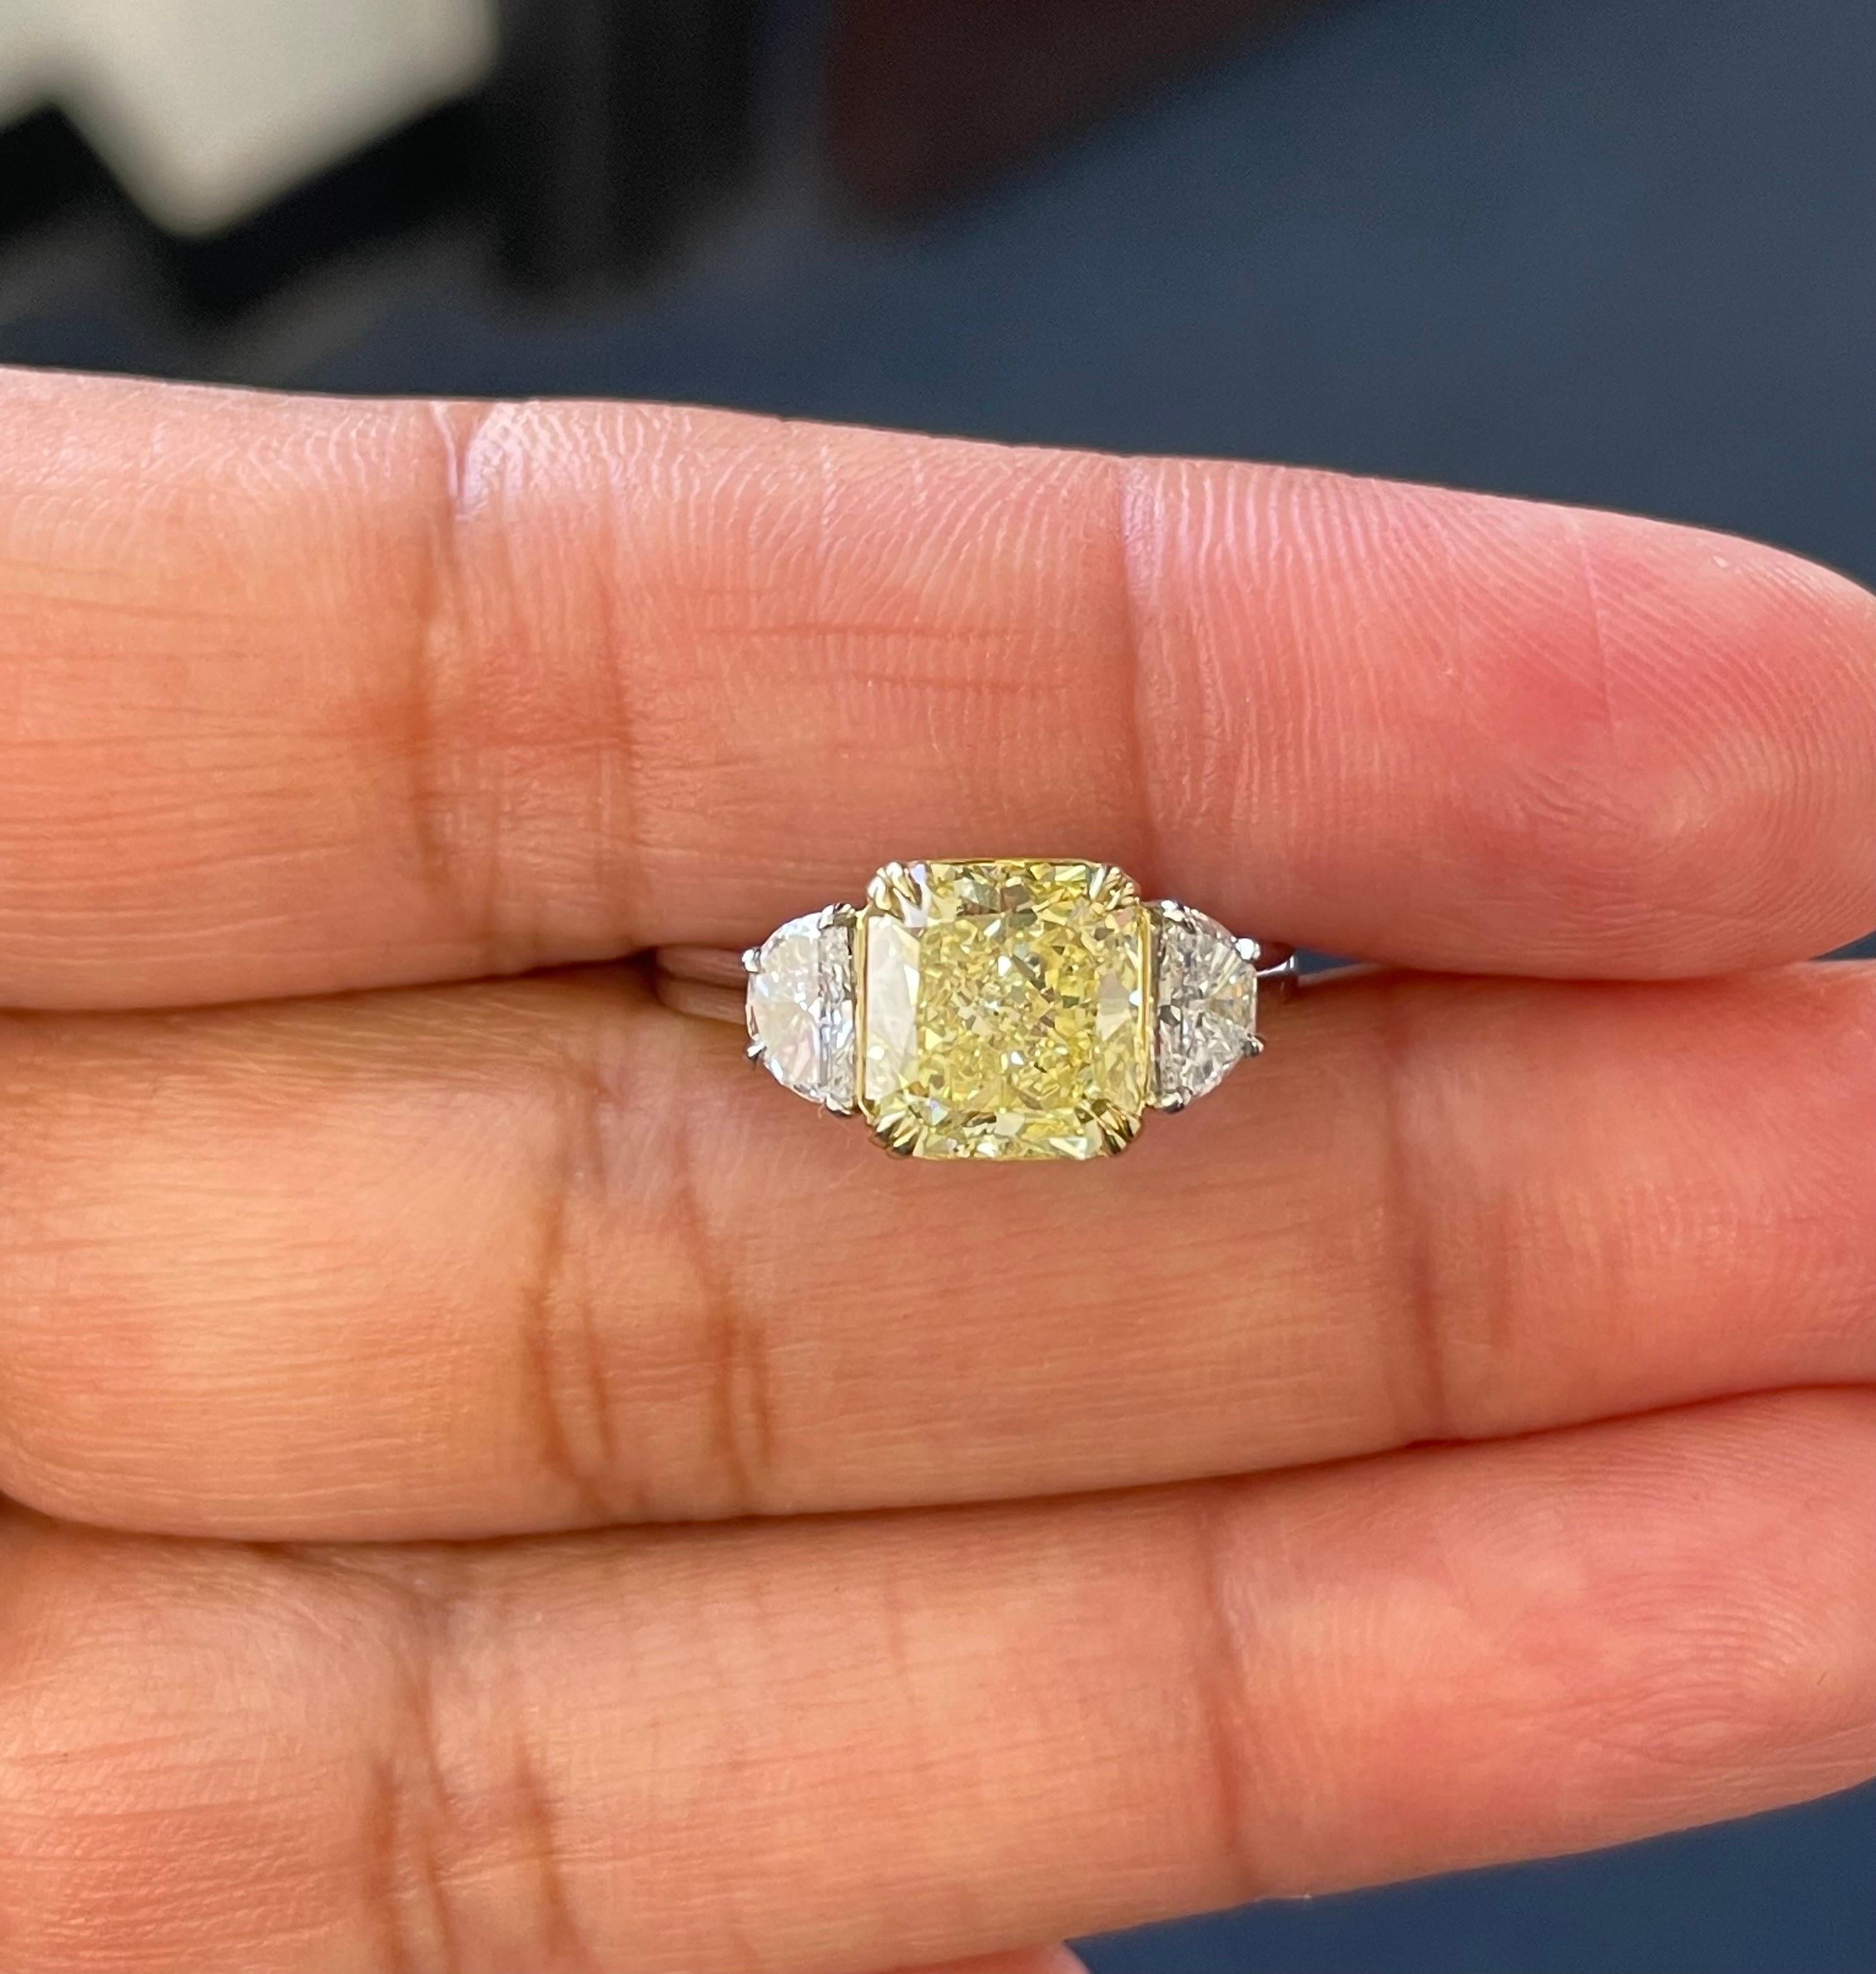 Radiant Cut GIA Fancy Intense Yellow Diamond Radiant Three Stone Ring in Platinum and 18k For Sale